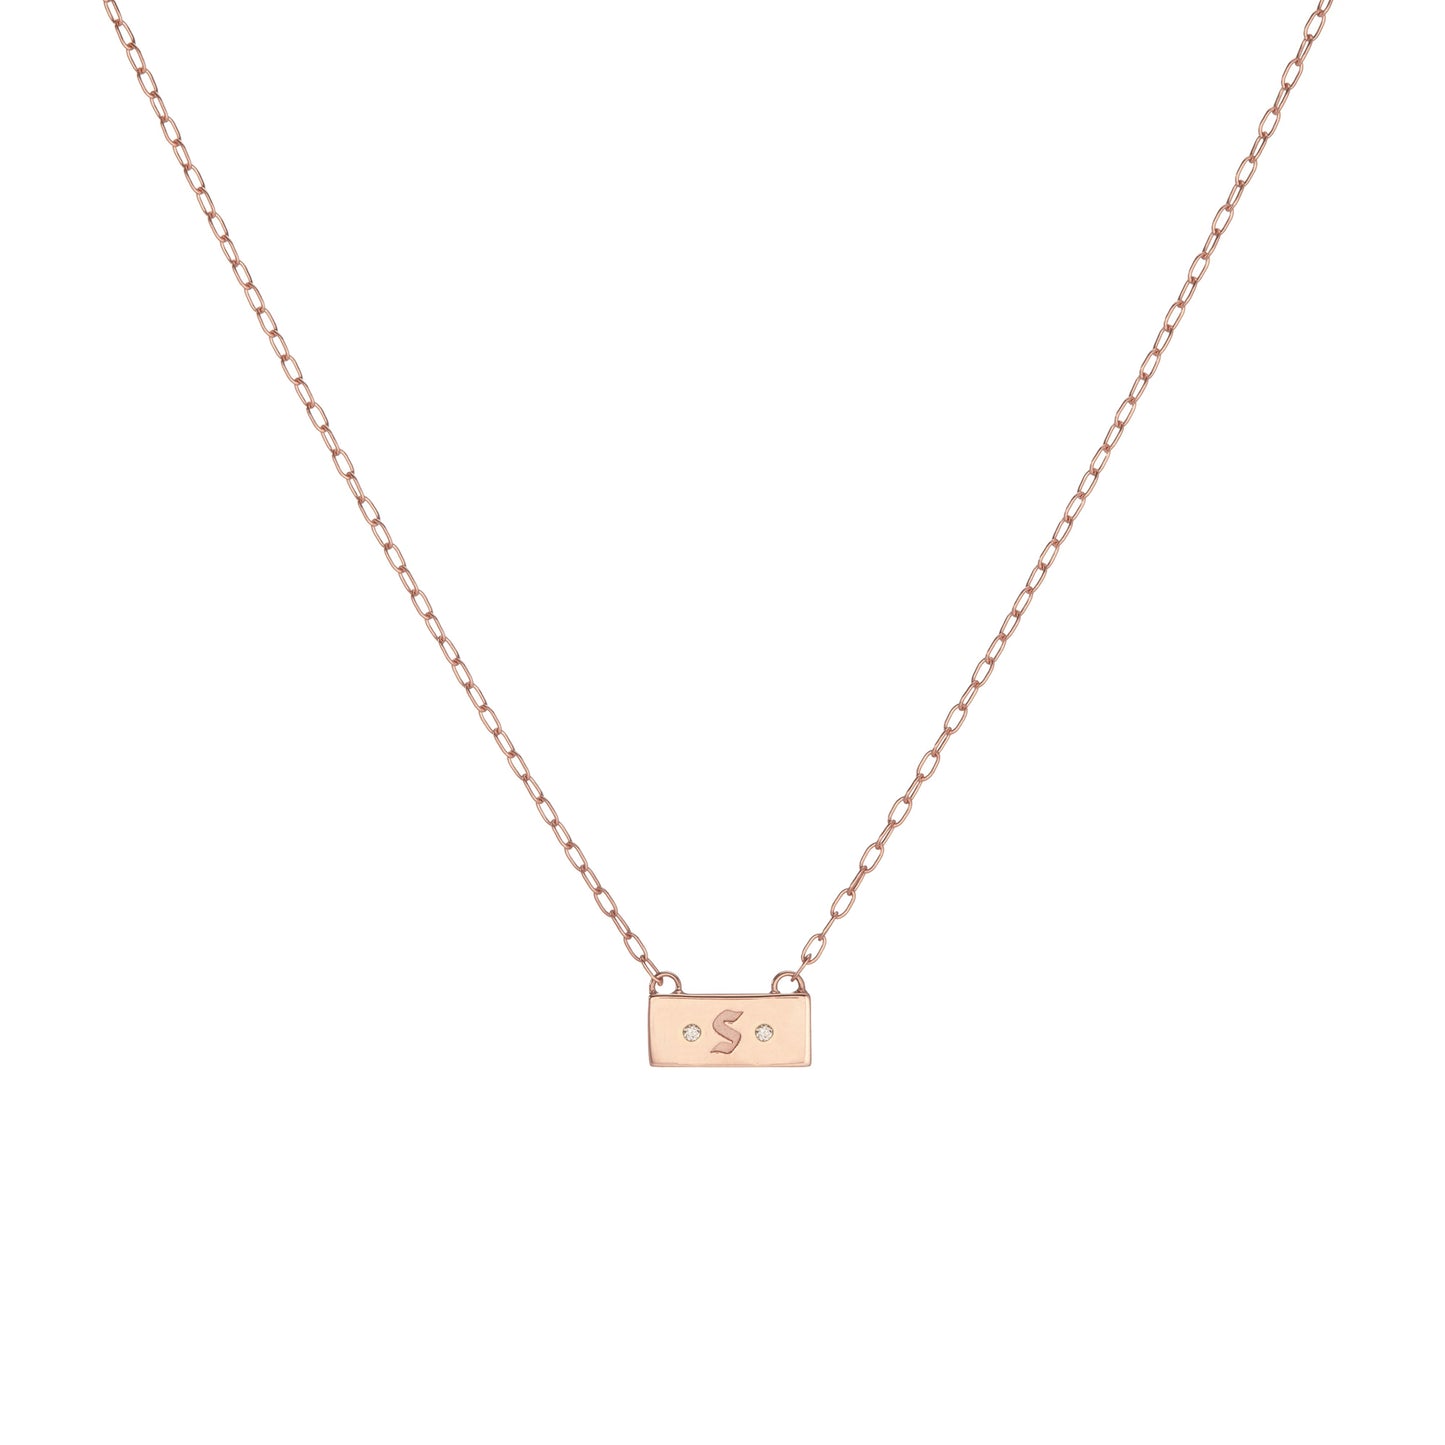 Jennifer Fisher - 1 Gothic Letter and 2 Diamond Pendant Necklace - Rose Gold